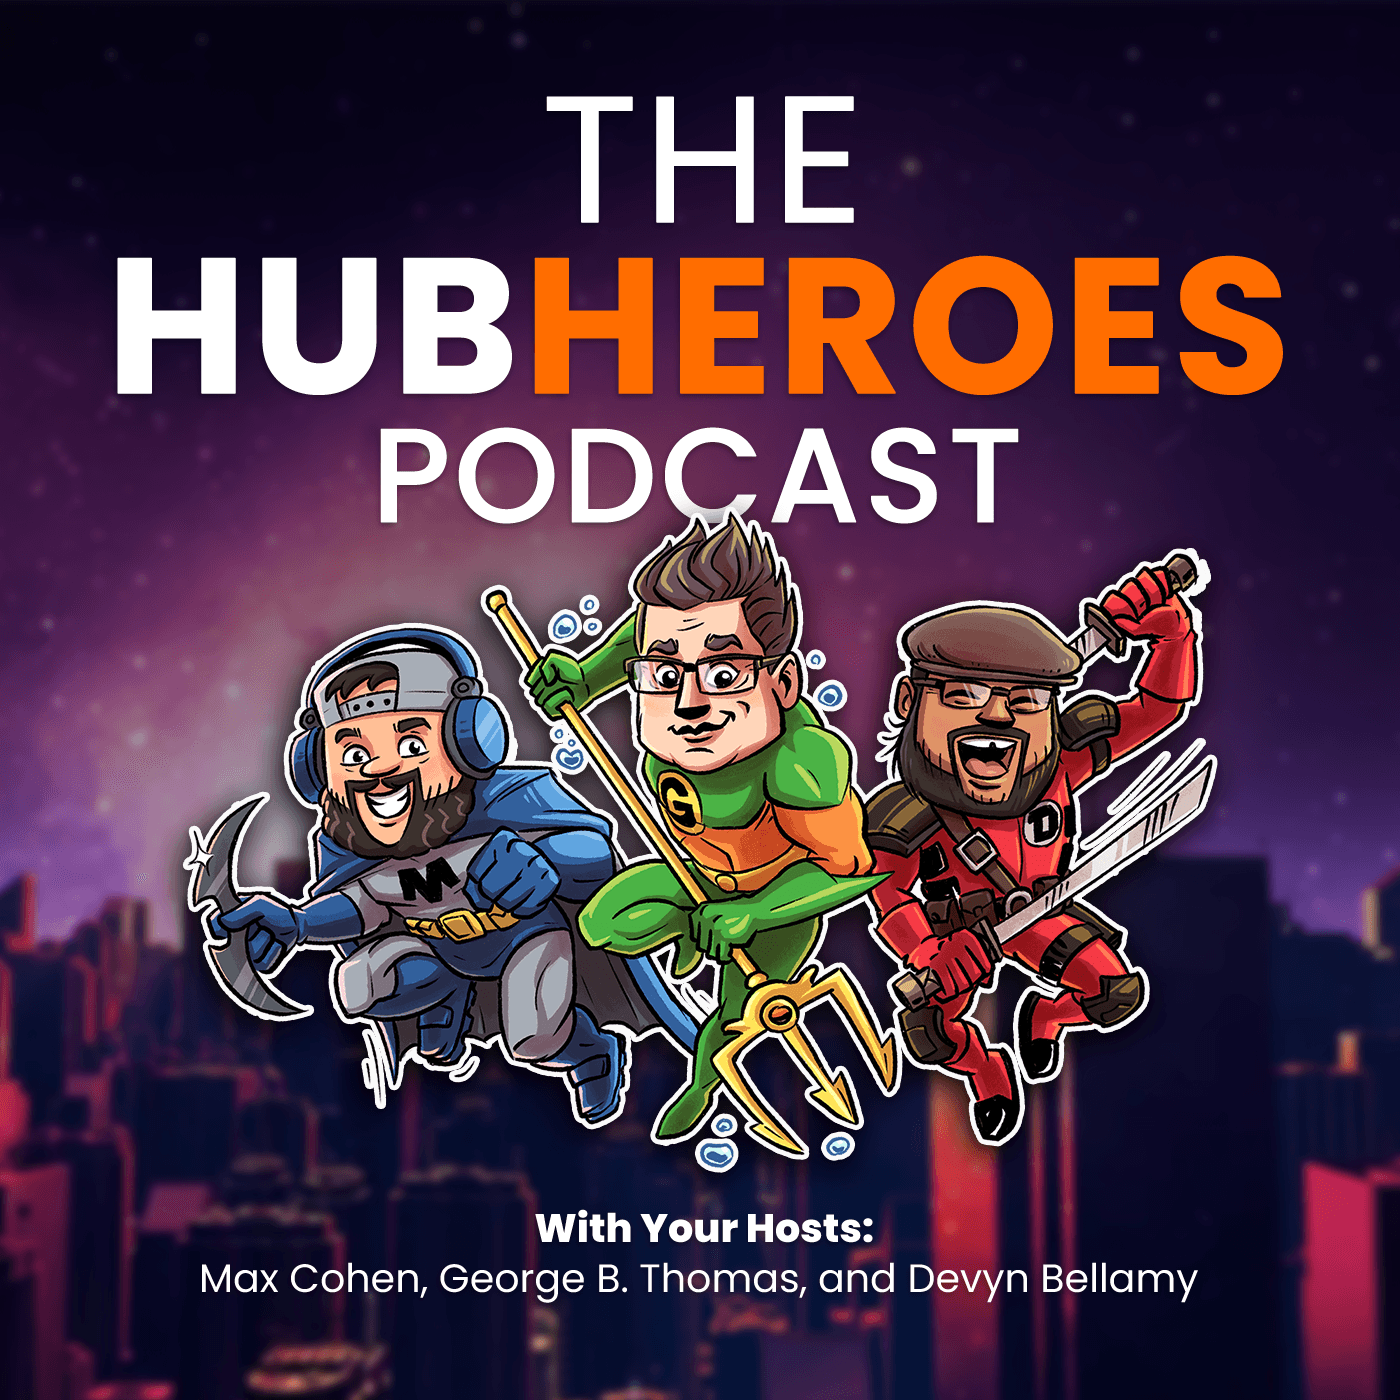 Demystifying your customer buyer's journey (HubHeroes Podcast, Ep. 3)